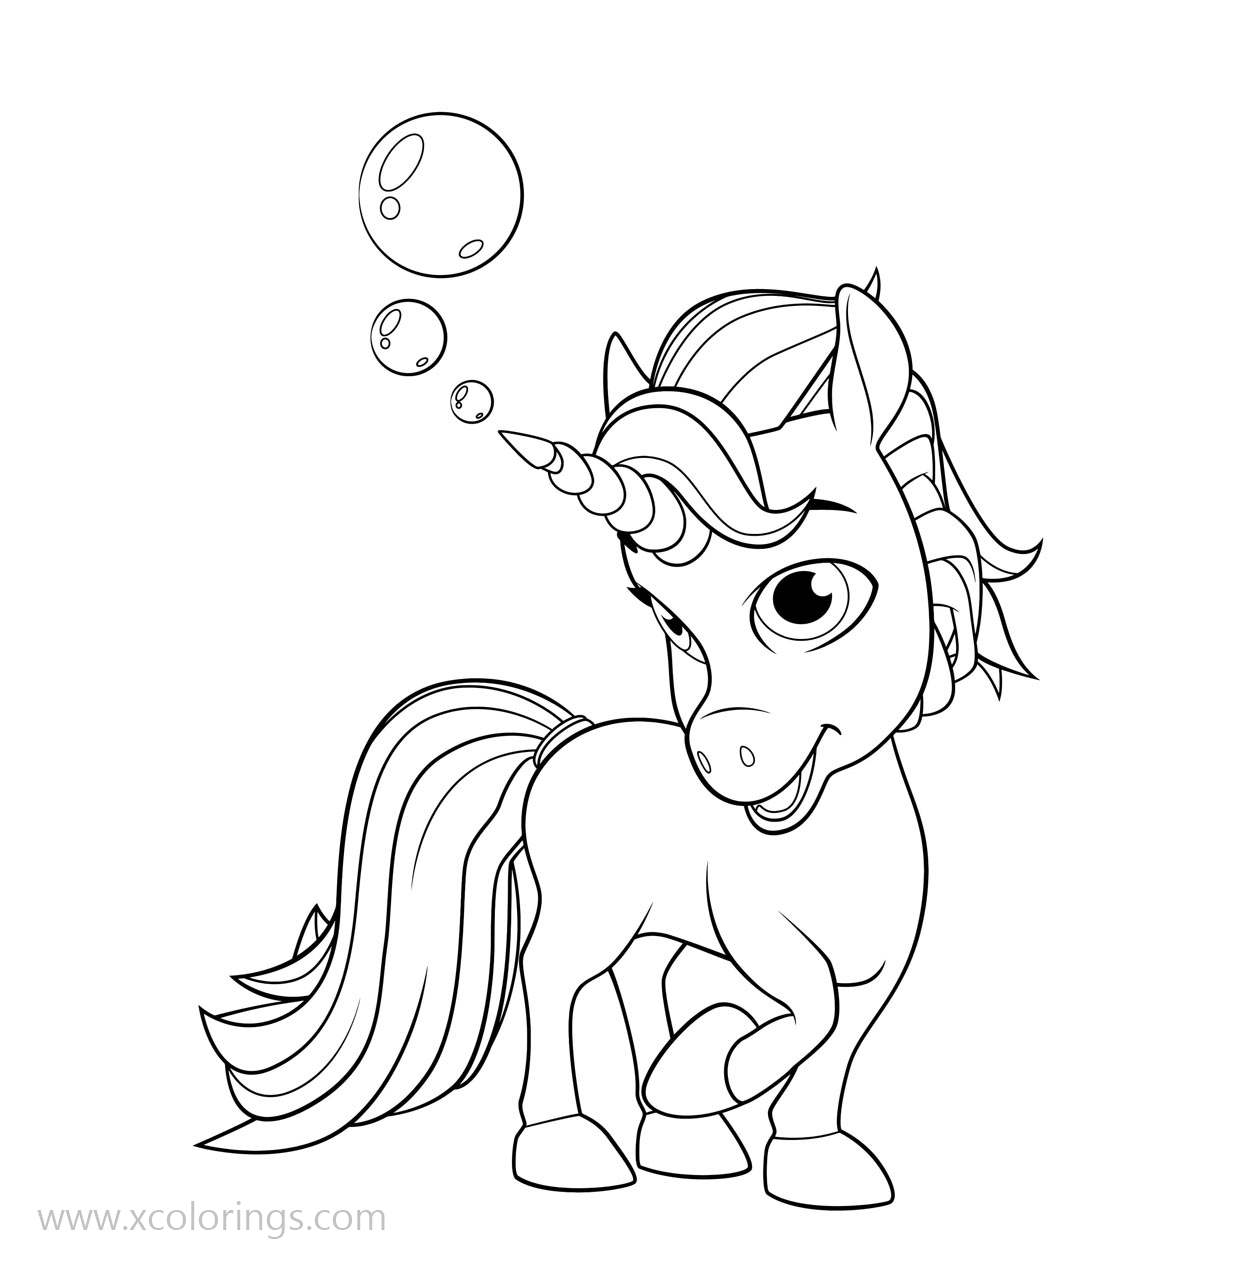 Free Rainbow Rangers Coloring Pages Unicorn Floof printable